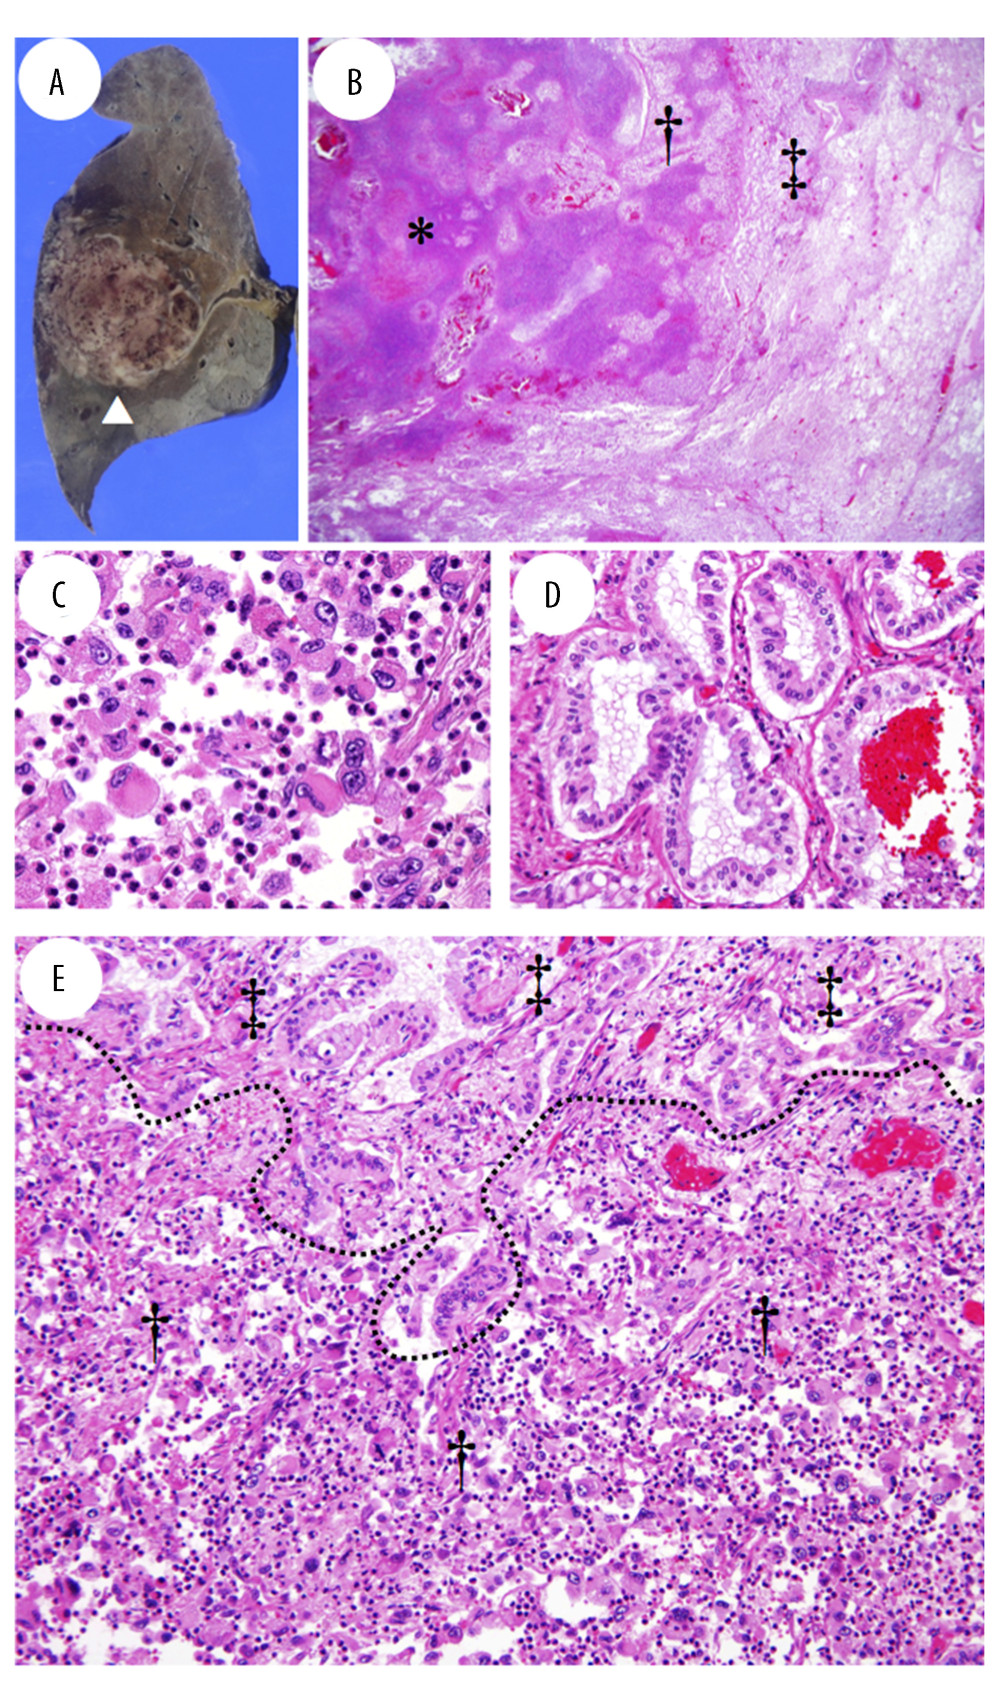 Autopsy findings of the right lower lobe of the lung. (A) Gross appearance. The tumor was well- to partly ill-demarcated and irregularly shaped with massive hemorrhage (arrowhead). (B–E) Histological examination of the right S6 mass specimens revealed an extensive necrotic area (* in B) with a component of the solid area with rhabdoid cells, characterized by large cells with eccentrically located nuclei, prominent nucleoli, abundant eosinophilic cytoplasm, and large paranuclear intracytoplasmic inclusions († in B, C). The tumor also had a component of non-mucinous adenocarcinoma with focal intracytoplasmic mucin (‡ in B, D). (E) A continuum of changes from adenocarcinoma (‡) to the solid area with rhabdoid cells (†). B: 15×; C: 400×; D, E: 200× magnification. Hematoxylin and eosin (H&E) stain.